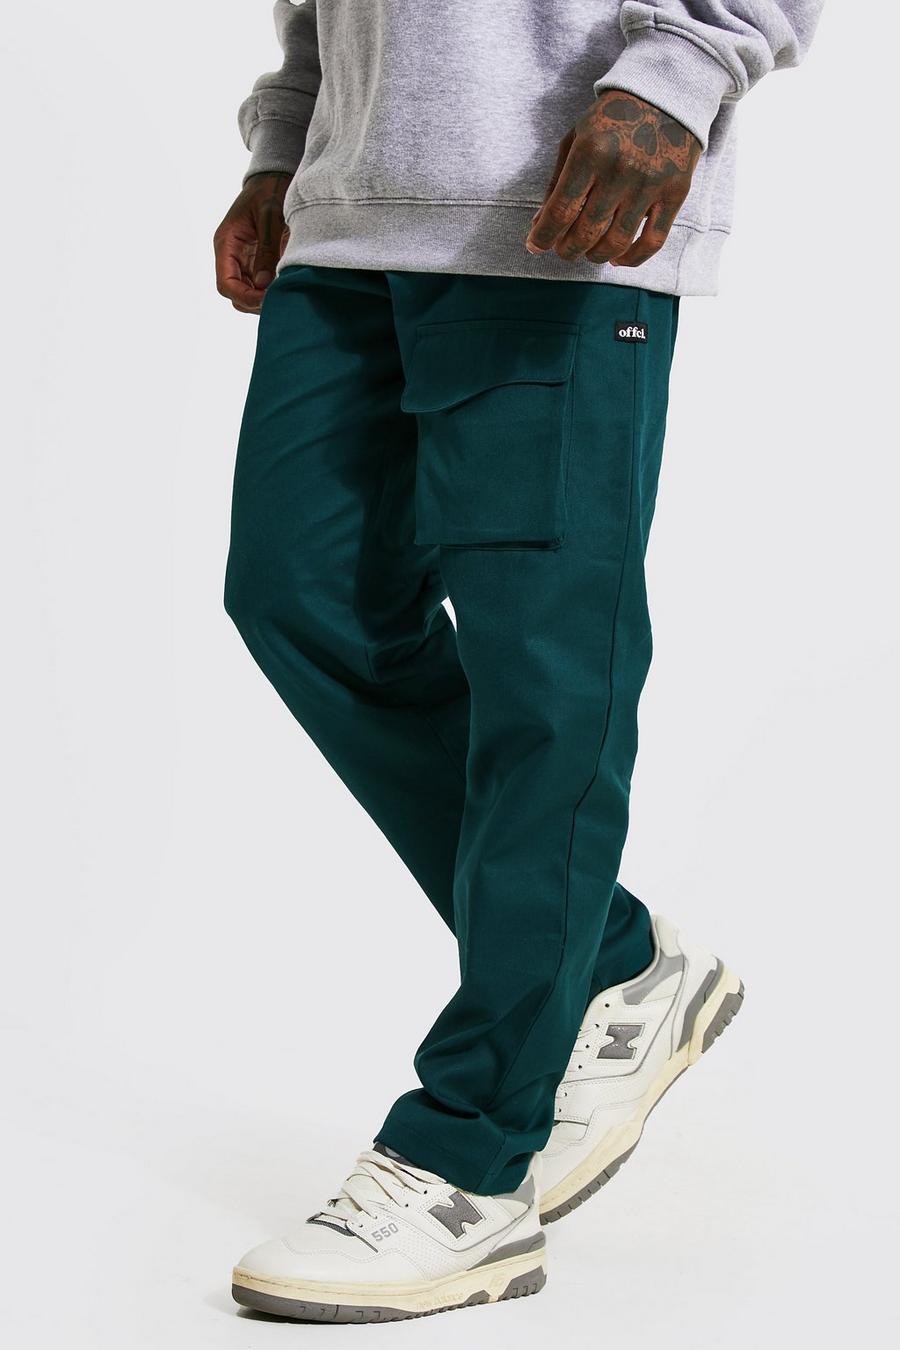 Forest green Offcl Relaxed Fit Curved Pocket Trouser